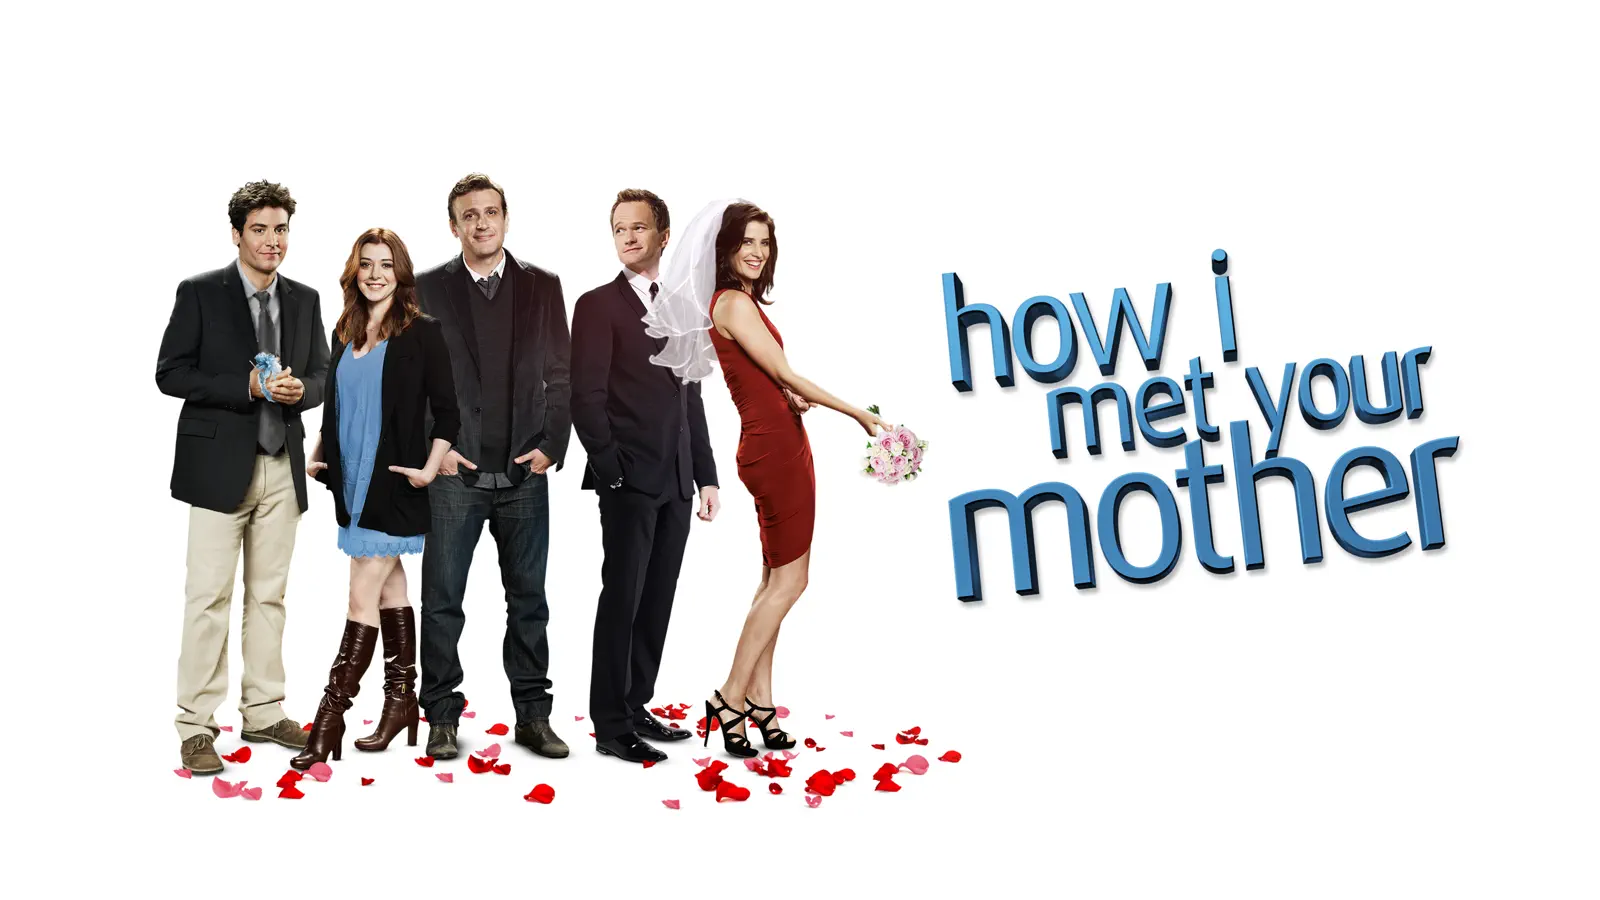 how i met your mother; a TV show of the 2000s